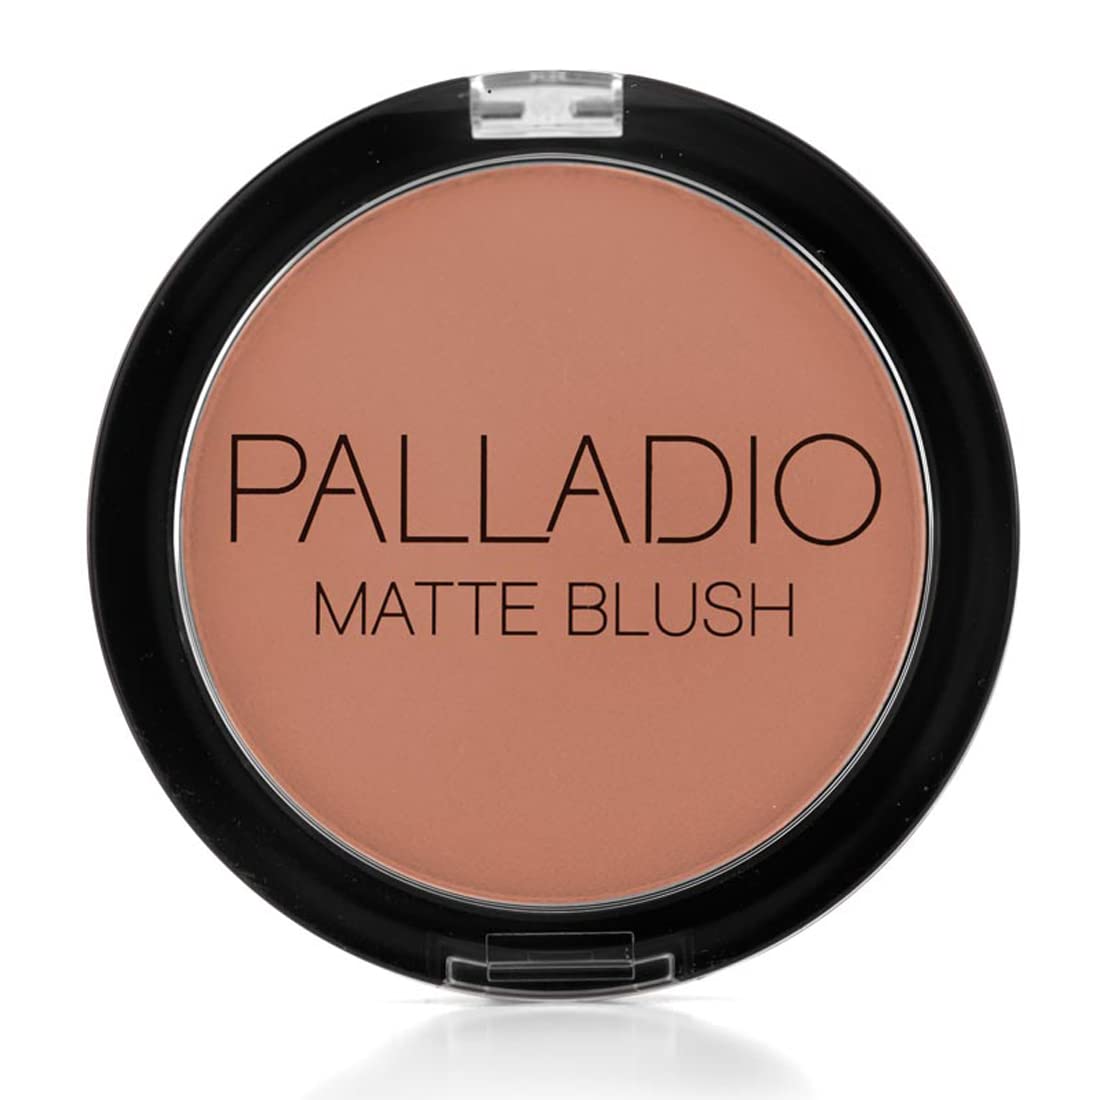 Palladio Matte Blush, Brushes onto Cheeks Smoothly, Soft Matte Look and Even Finish, awless Velvety Coverage, Effortless Blending Makeup, atters the Face, Convenient Compact, Chic